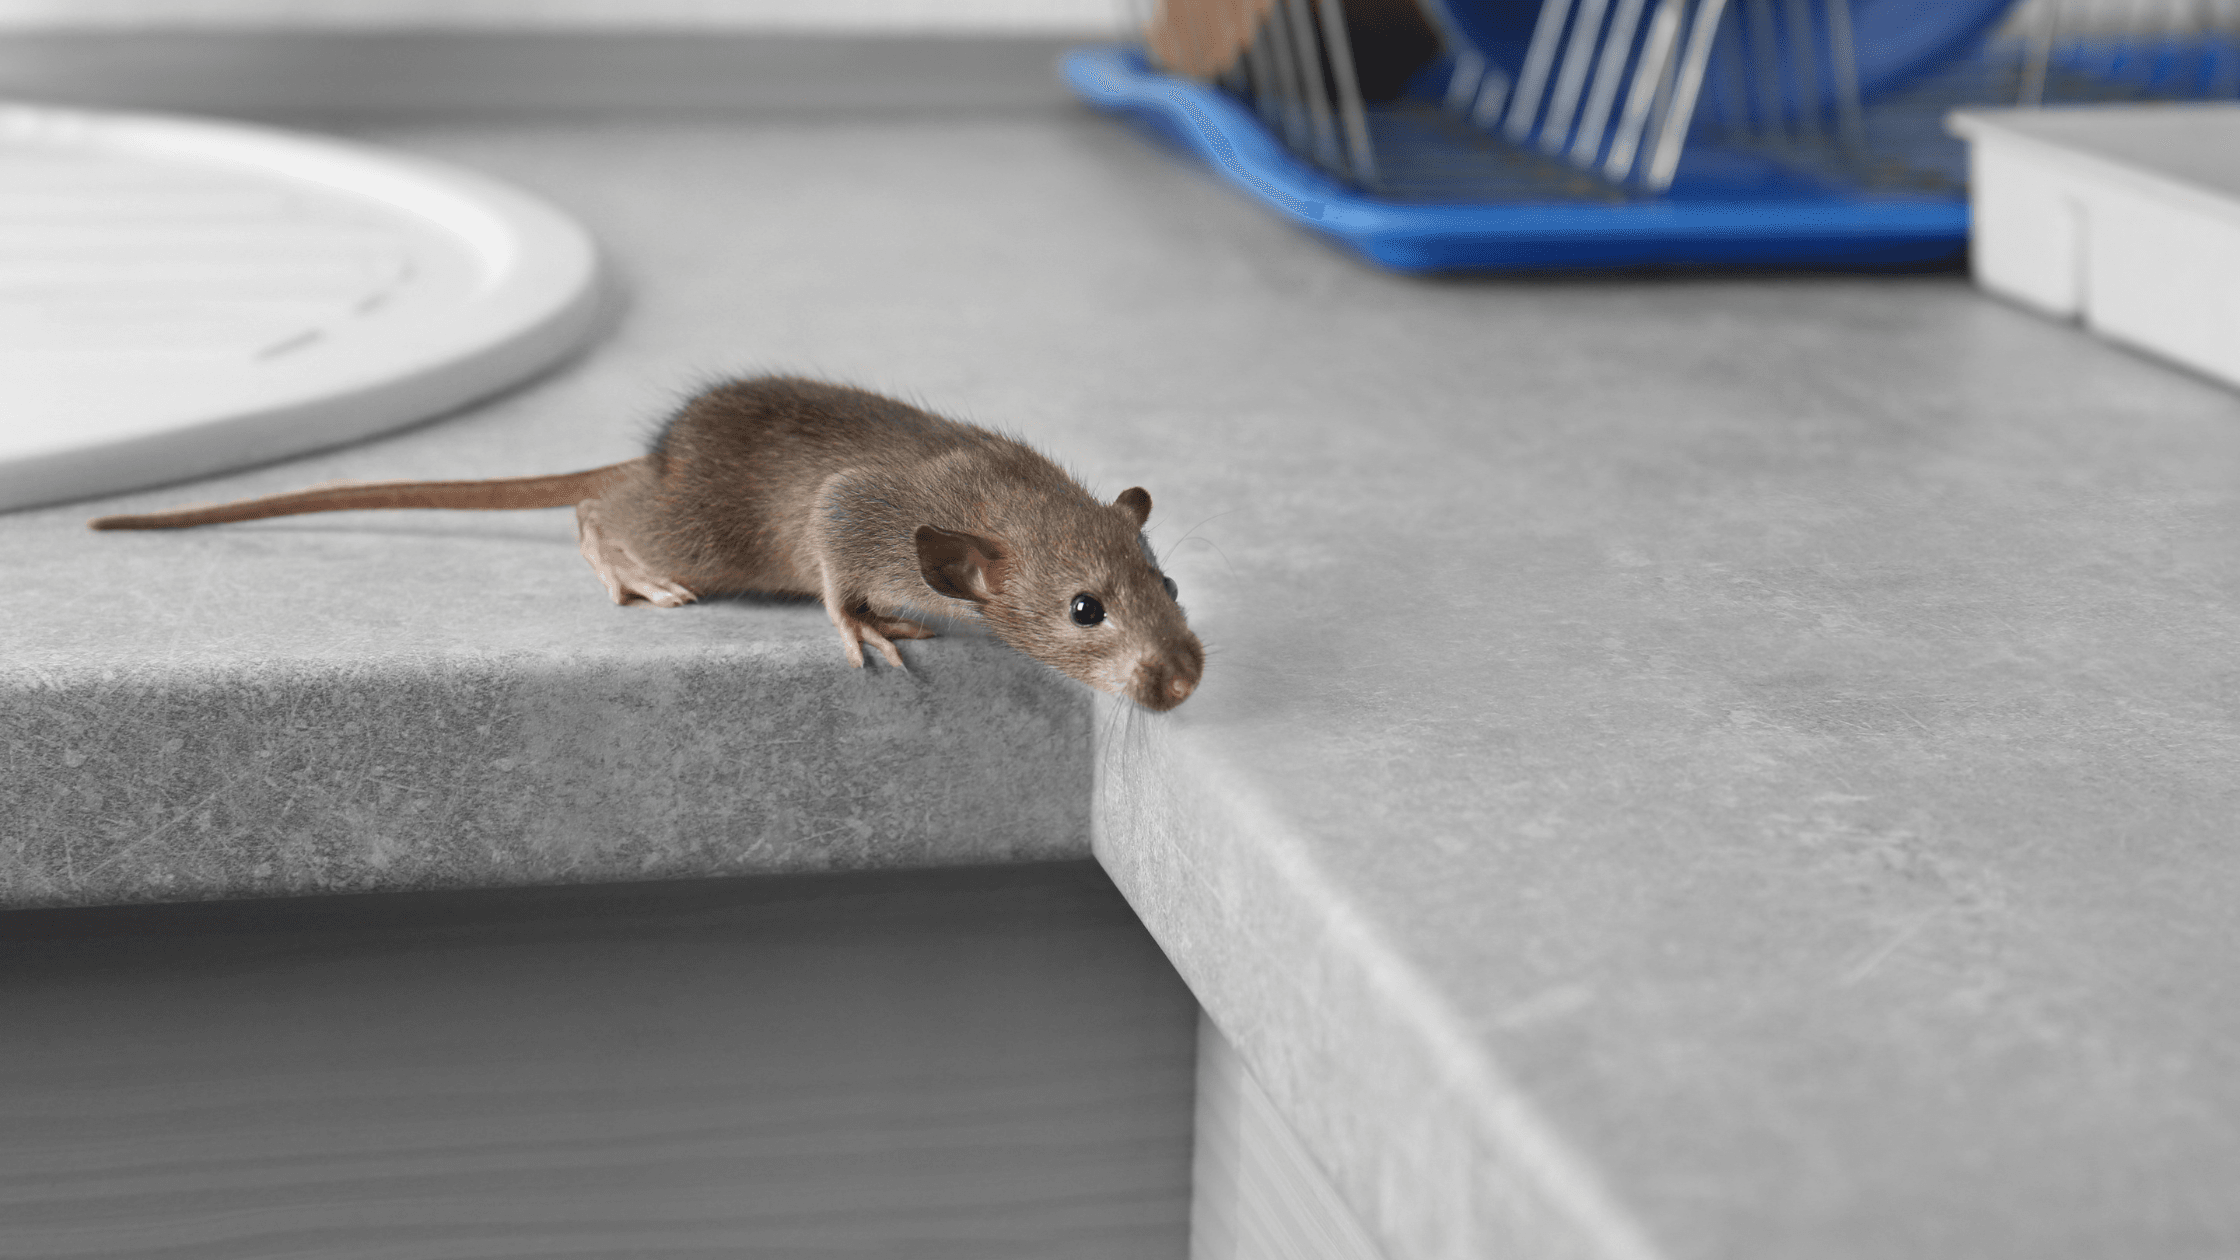 Mouse Bait - What is the Best Bait to Catch Mice?